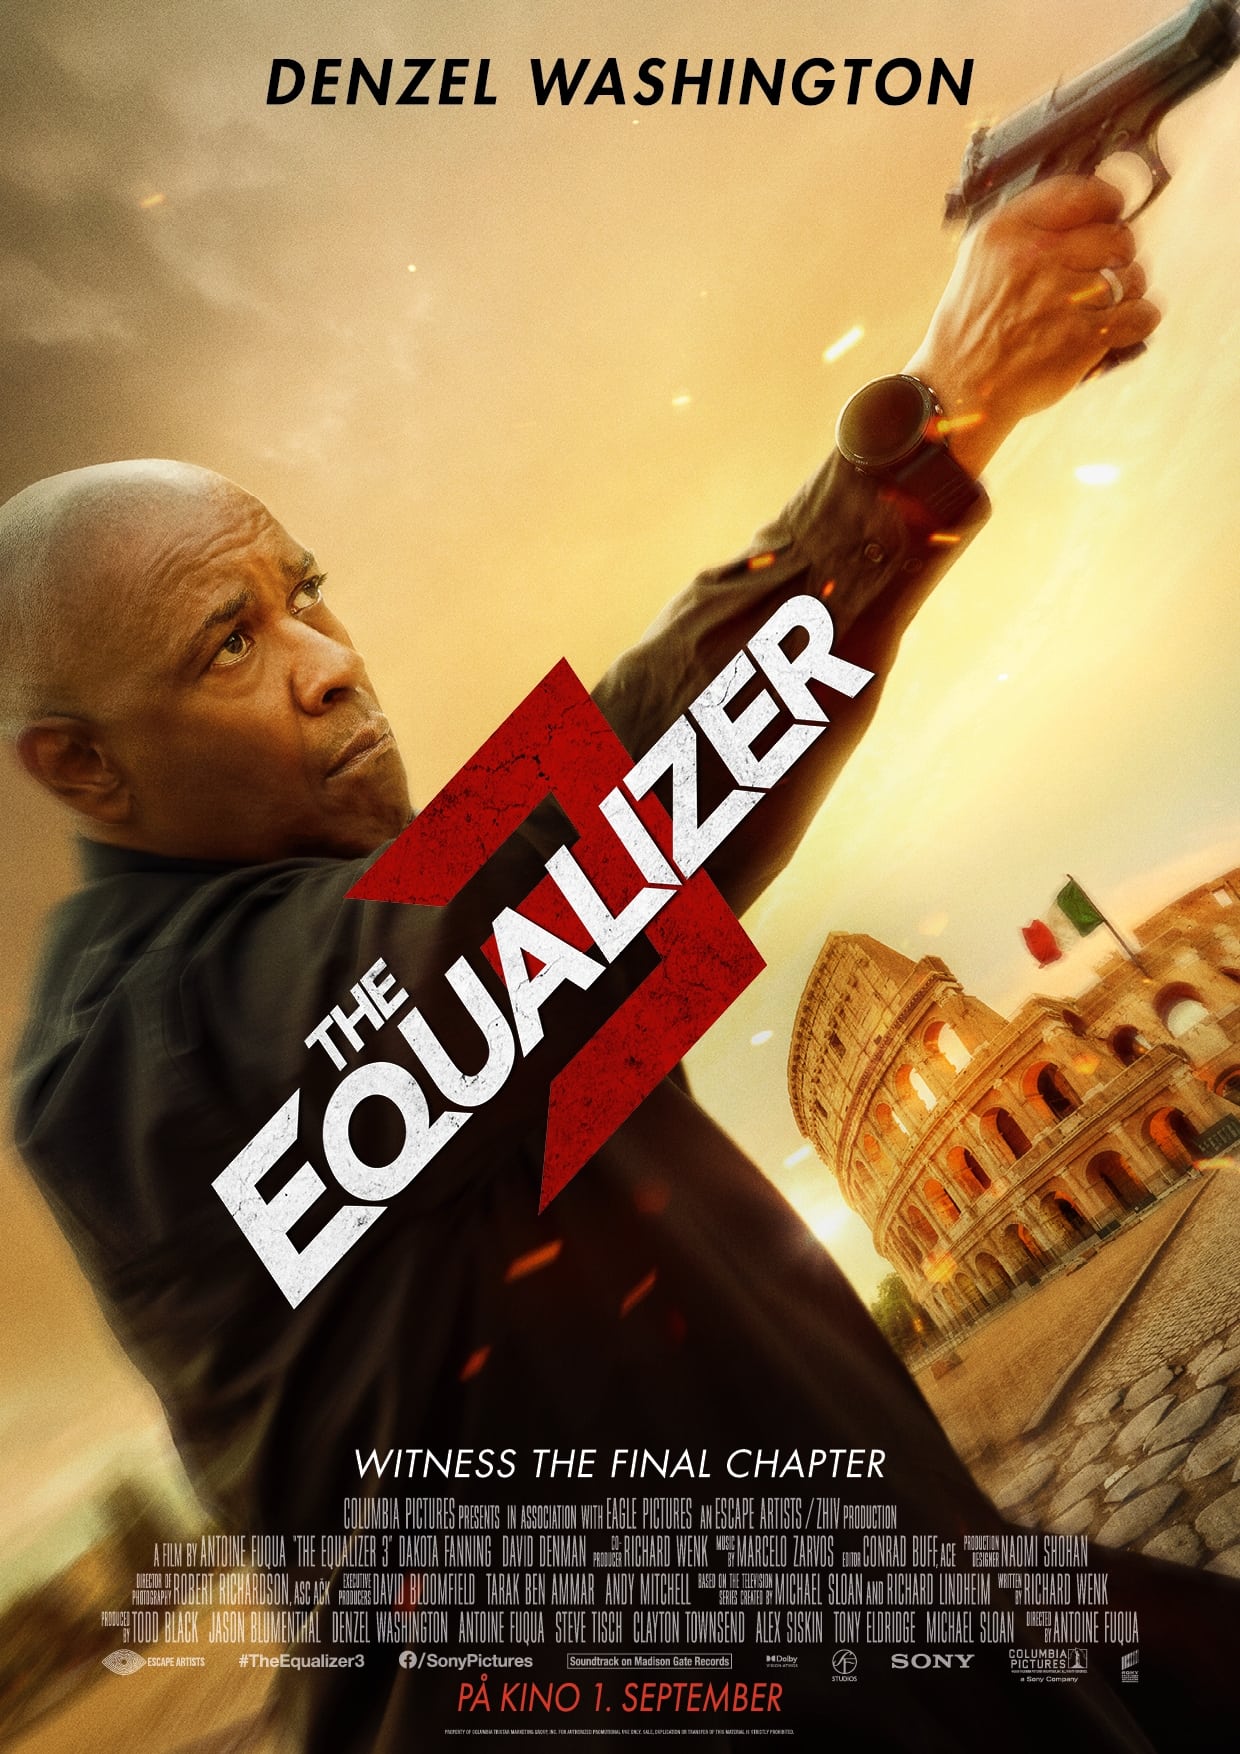 Poster and image movie The Equalizer 3